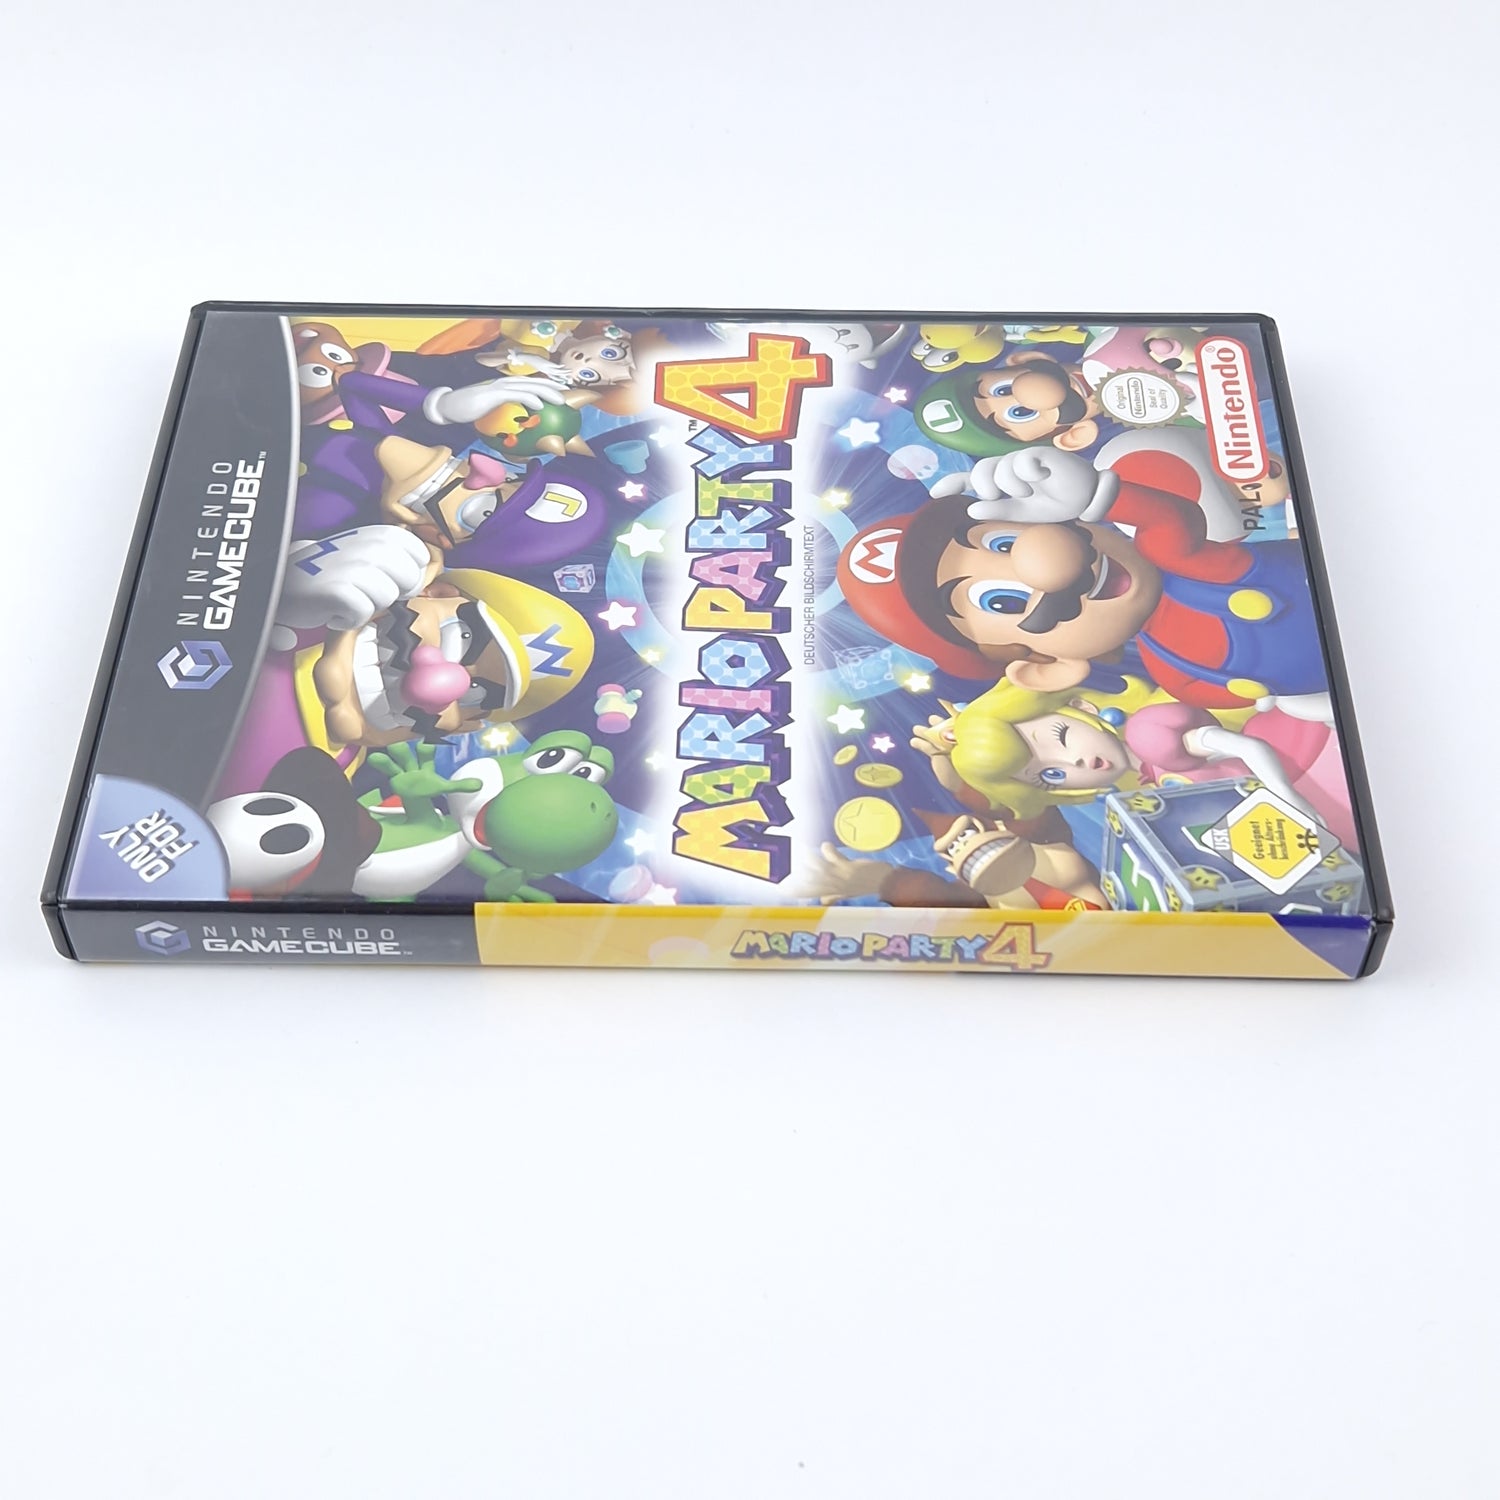 Nintendo Gamecube Game: Mario Party 4 - OVP Instructions CD Disk | PAL Game